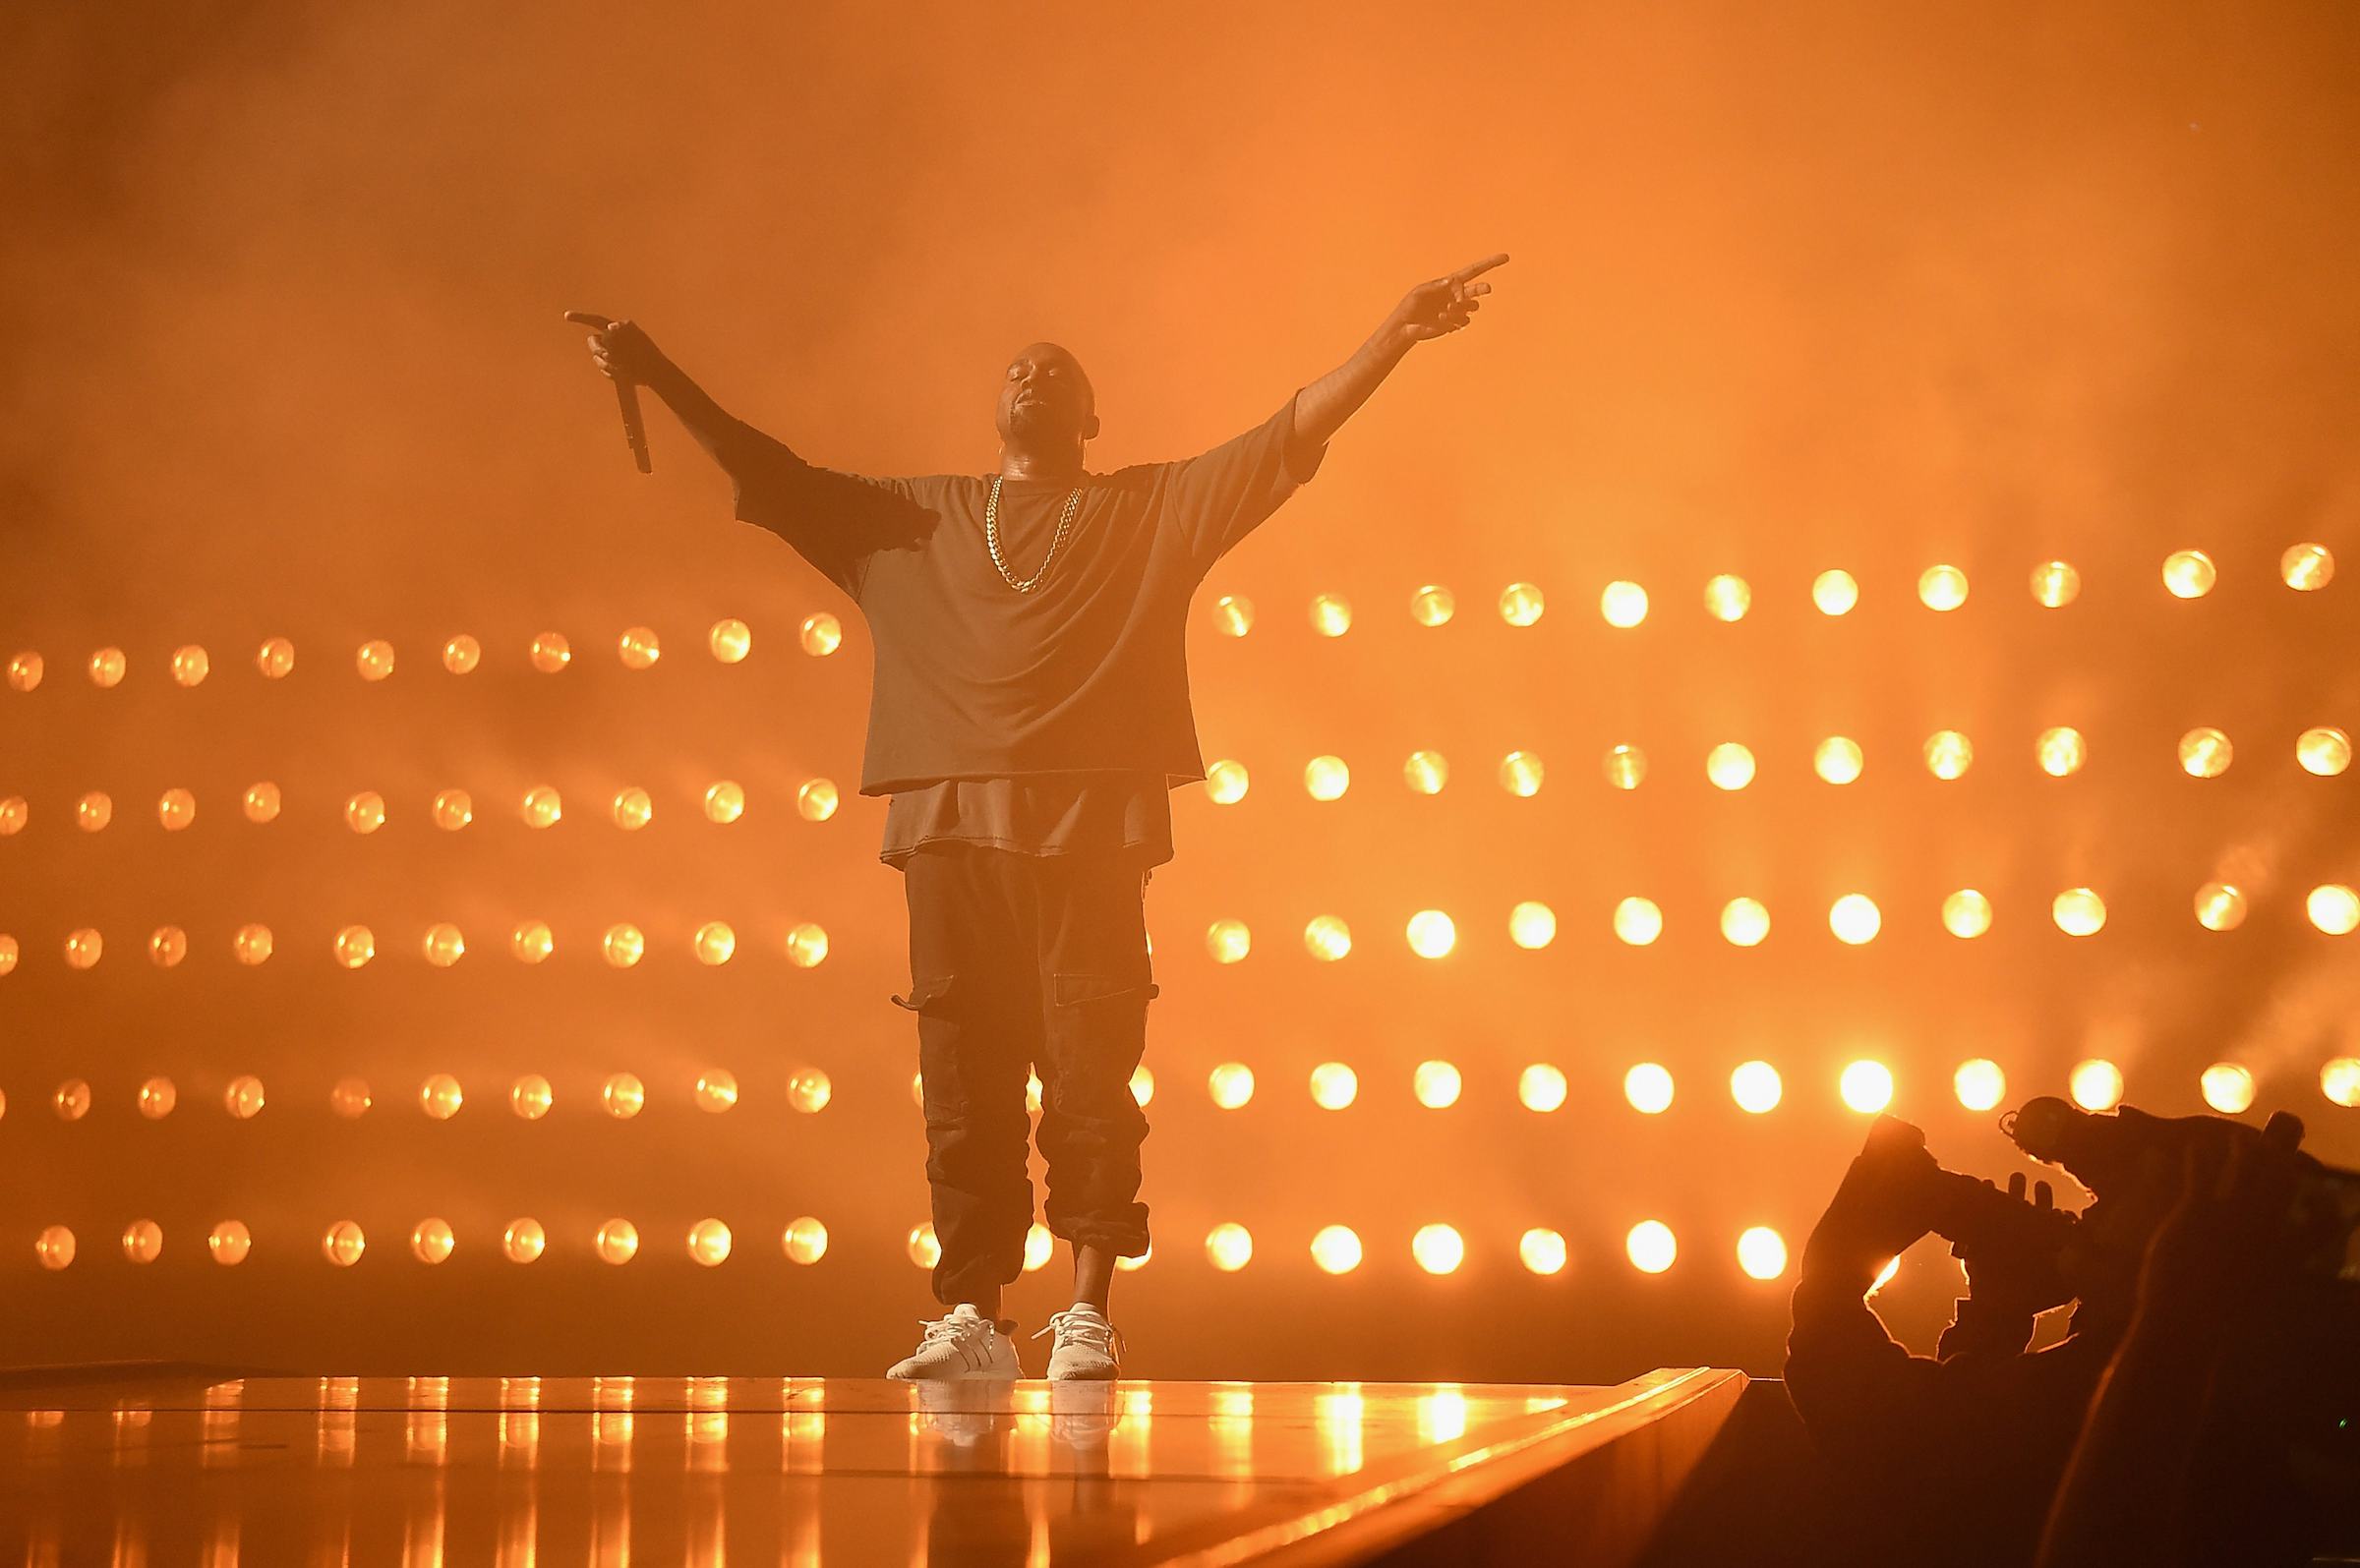 Kanye West’s New Album ‘Swish’ Finally Gets A Release Date